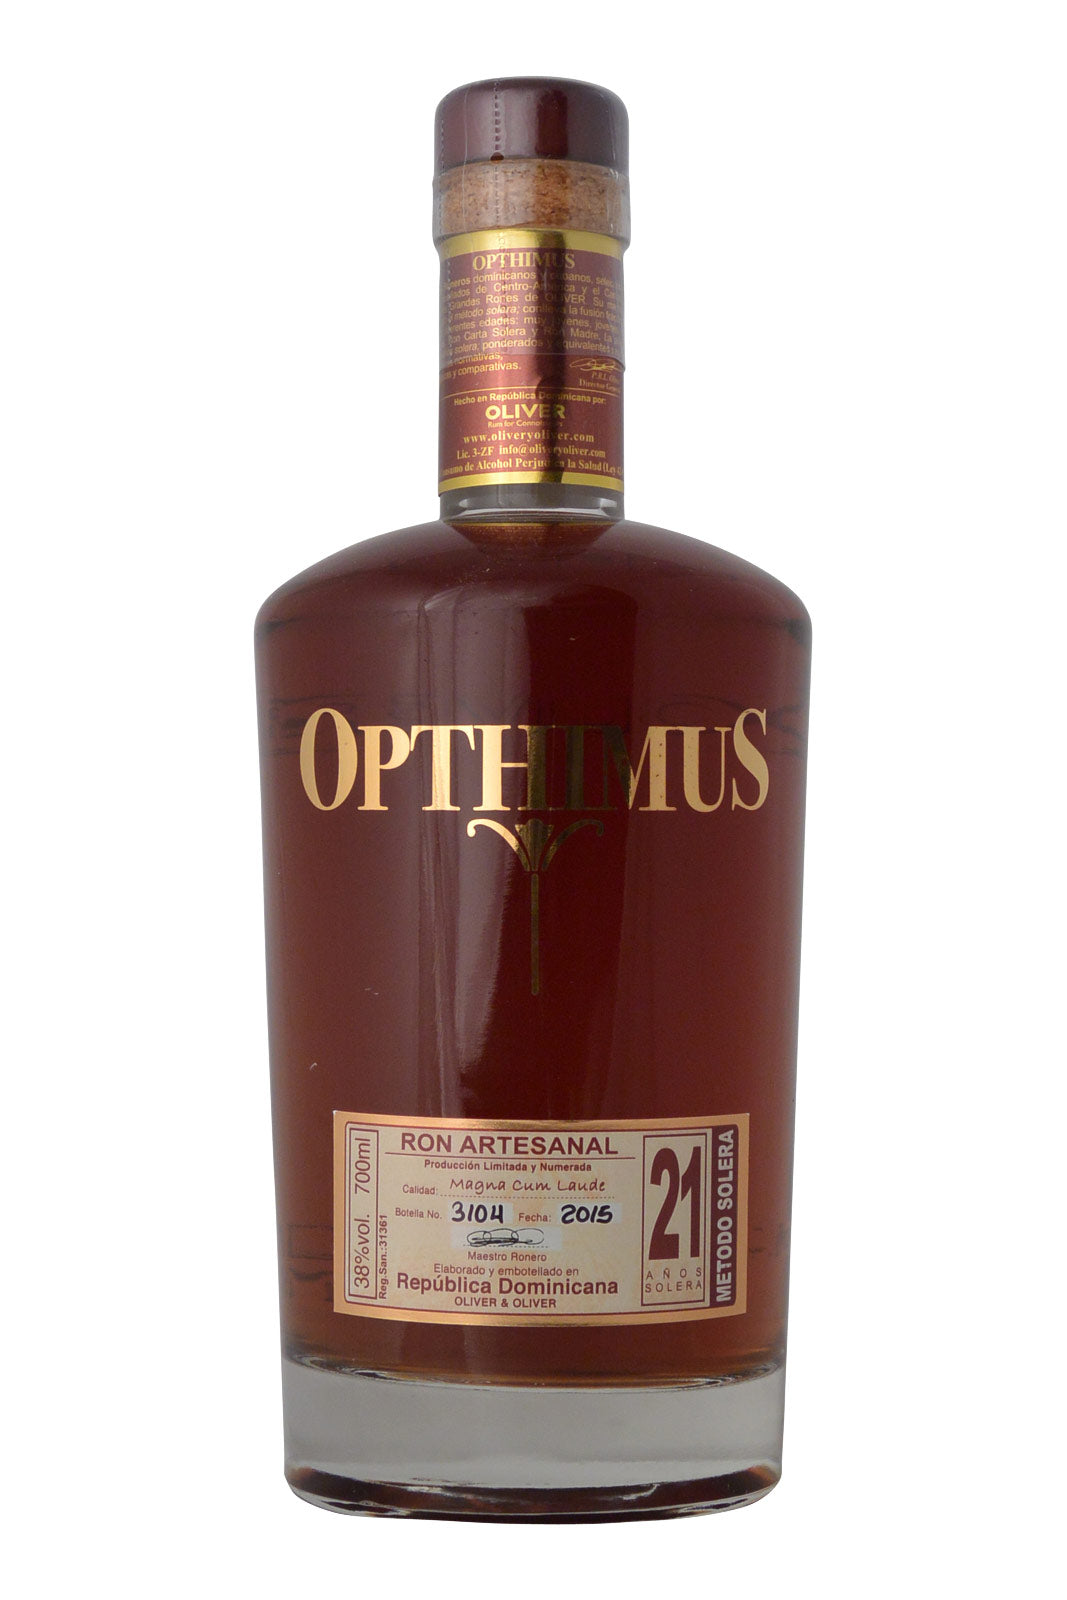 Opthimus 21 Year Old